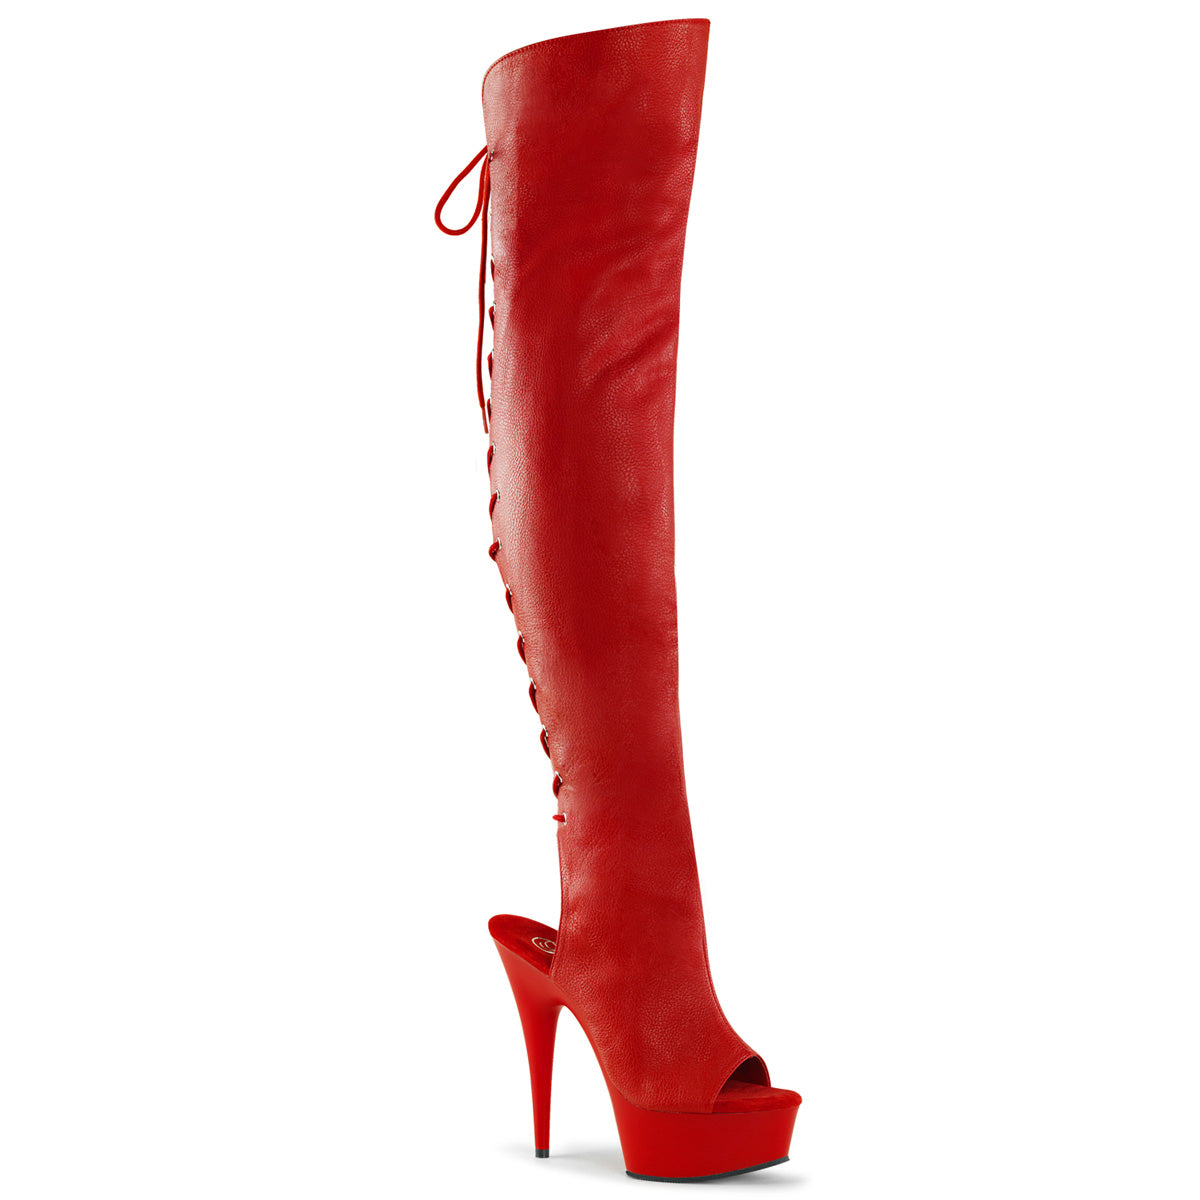 DELIGHT-3019 Pleaser 6 Inch Heel Red Pole Dancing Platforms-Pleaser- Sexy Shoes